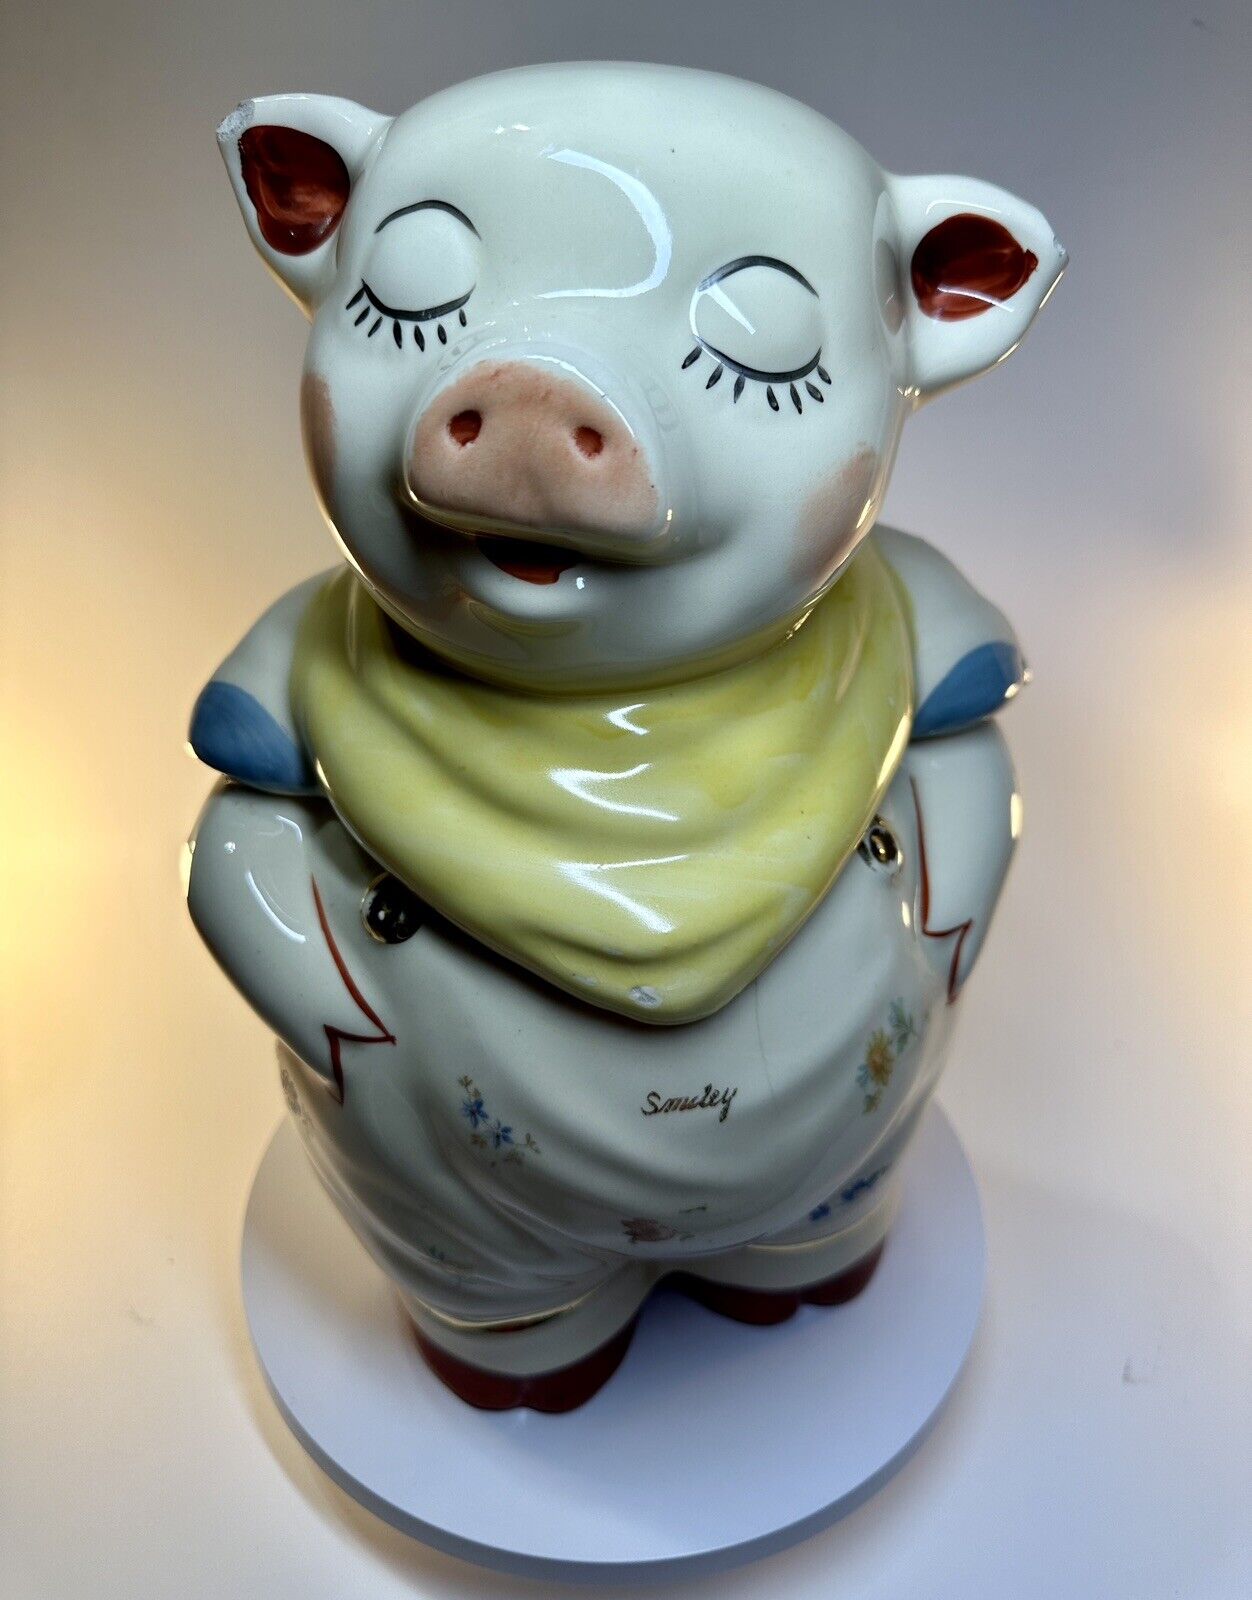 SMILEY PIG COOKIE JAR YELLOW SCARF SHAWNEE POTTERY Vintage 1940's made in USA